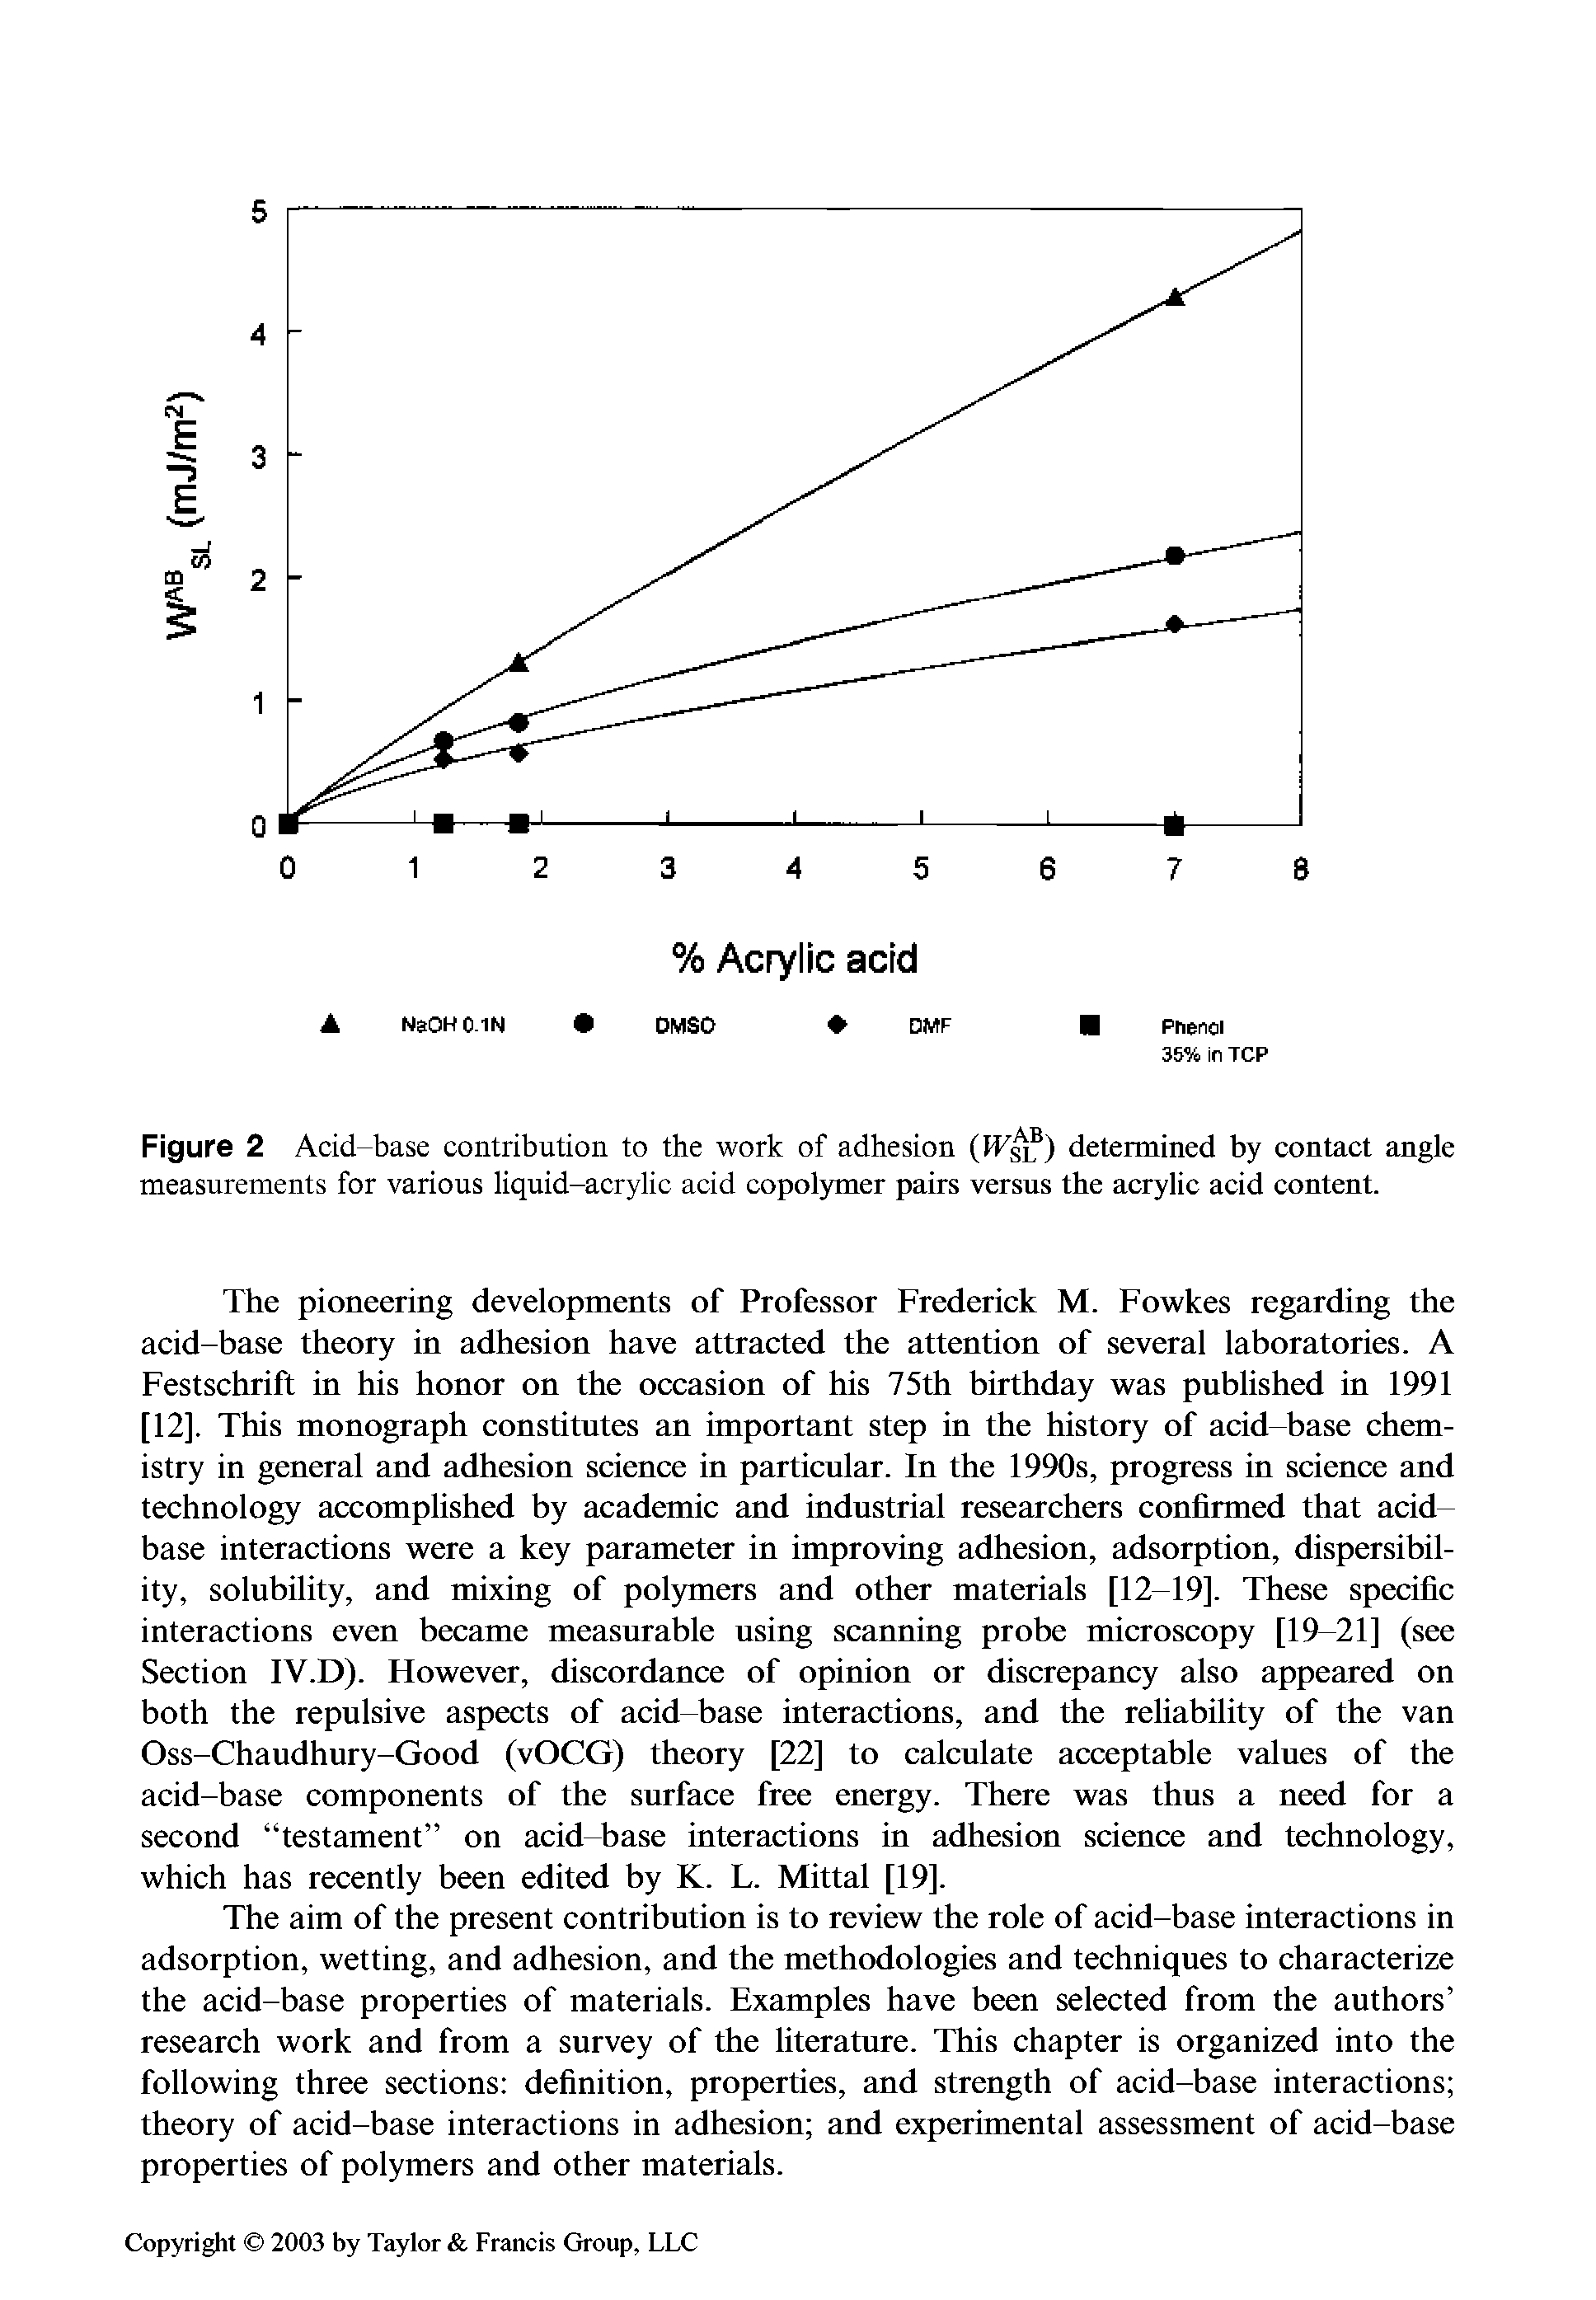 Figure 2 Acid-base contribution to the work of adhesion determined by contact angle...